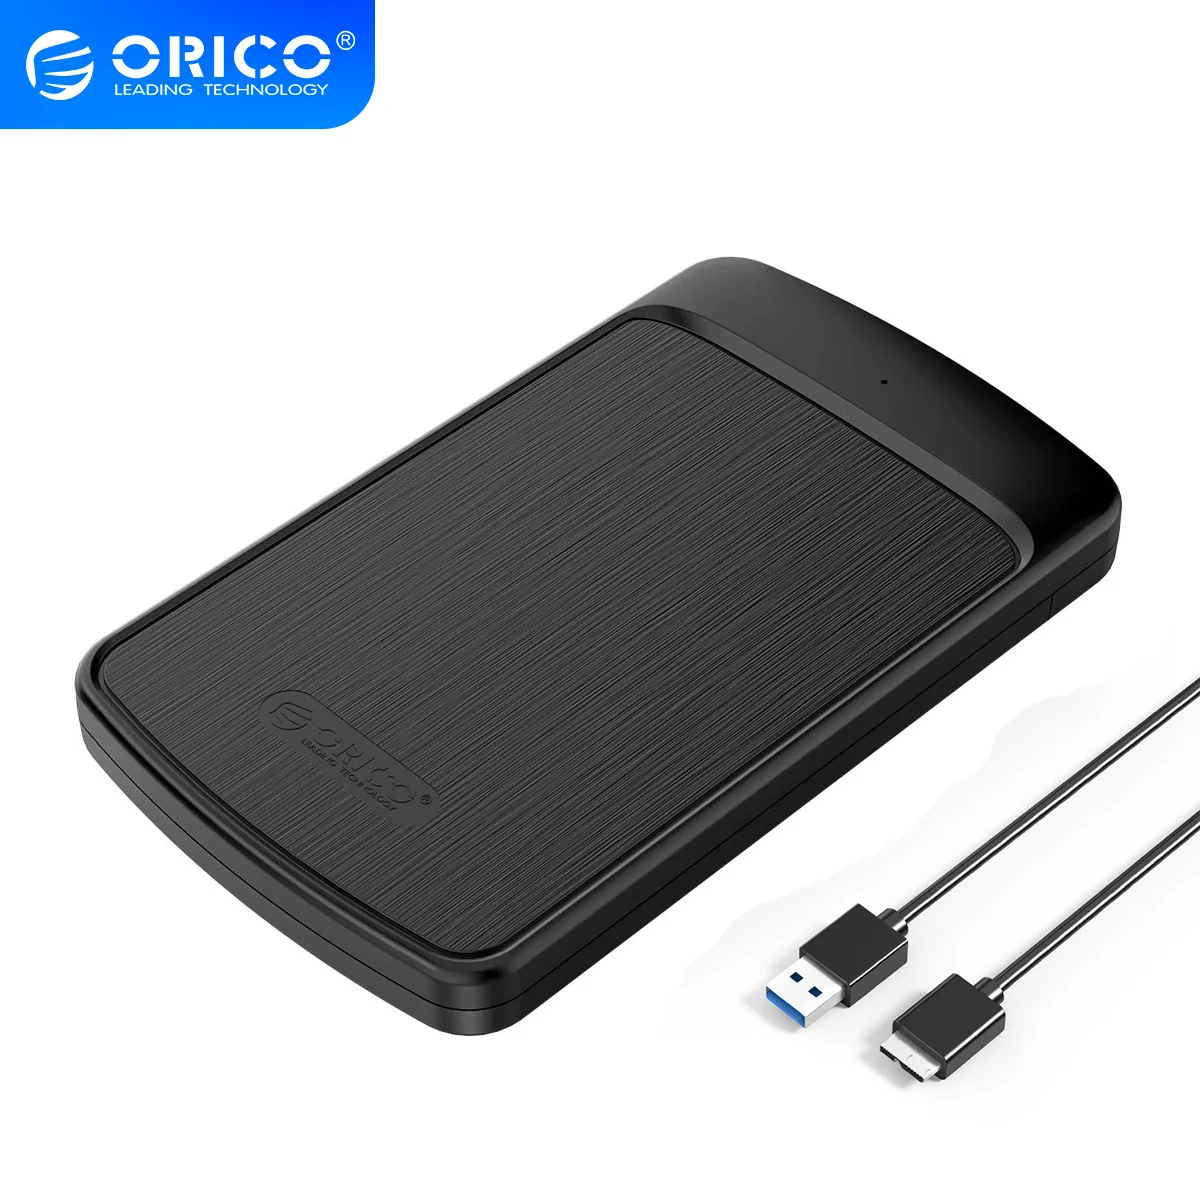 

ORICO HDD Enclosure Case for Hard Drive 2.5 inch SATA USB3.0 Portable External Solid State Drive Box 5Gbps 4TB Mobile HDD Caddy